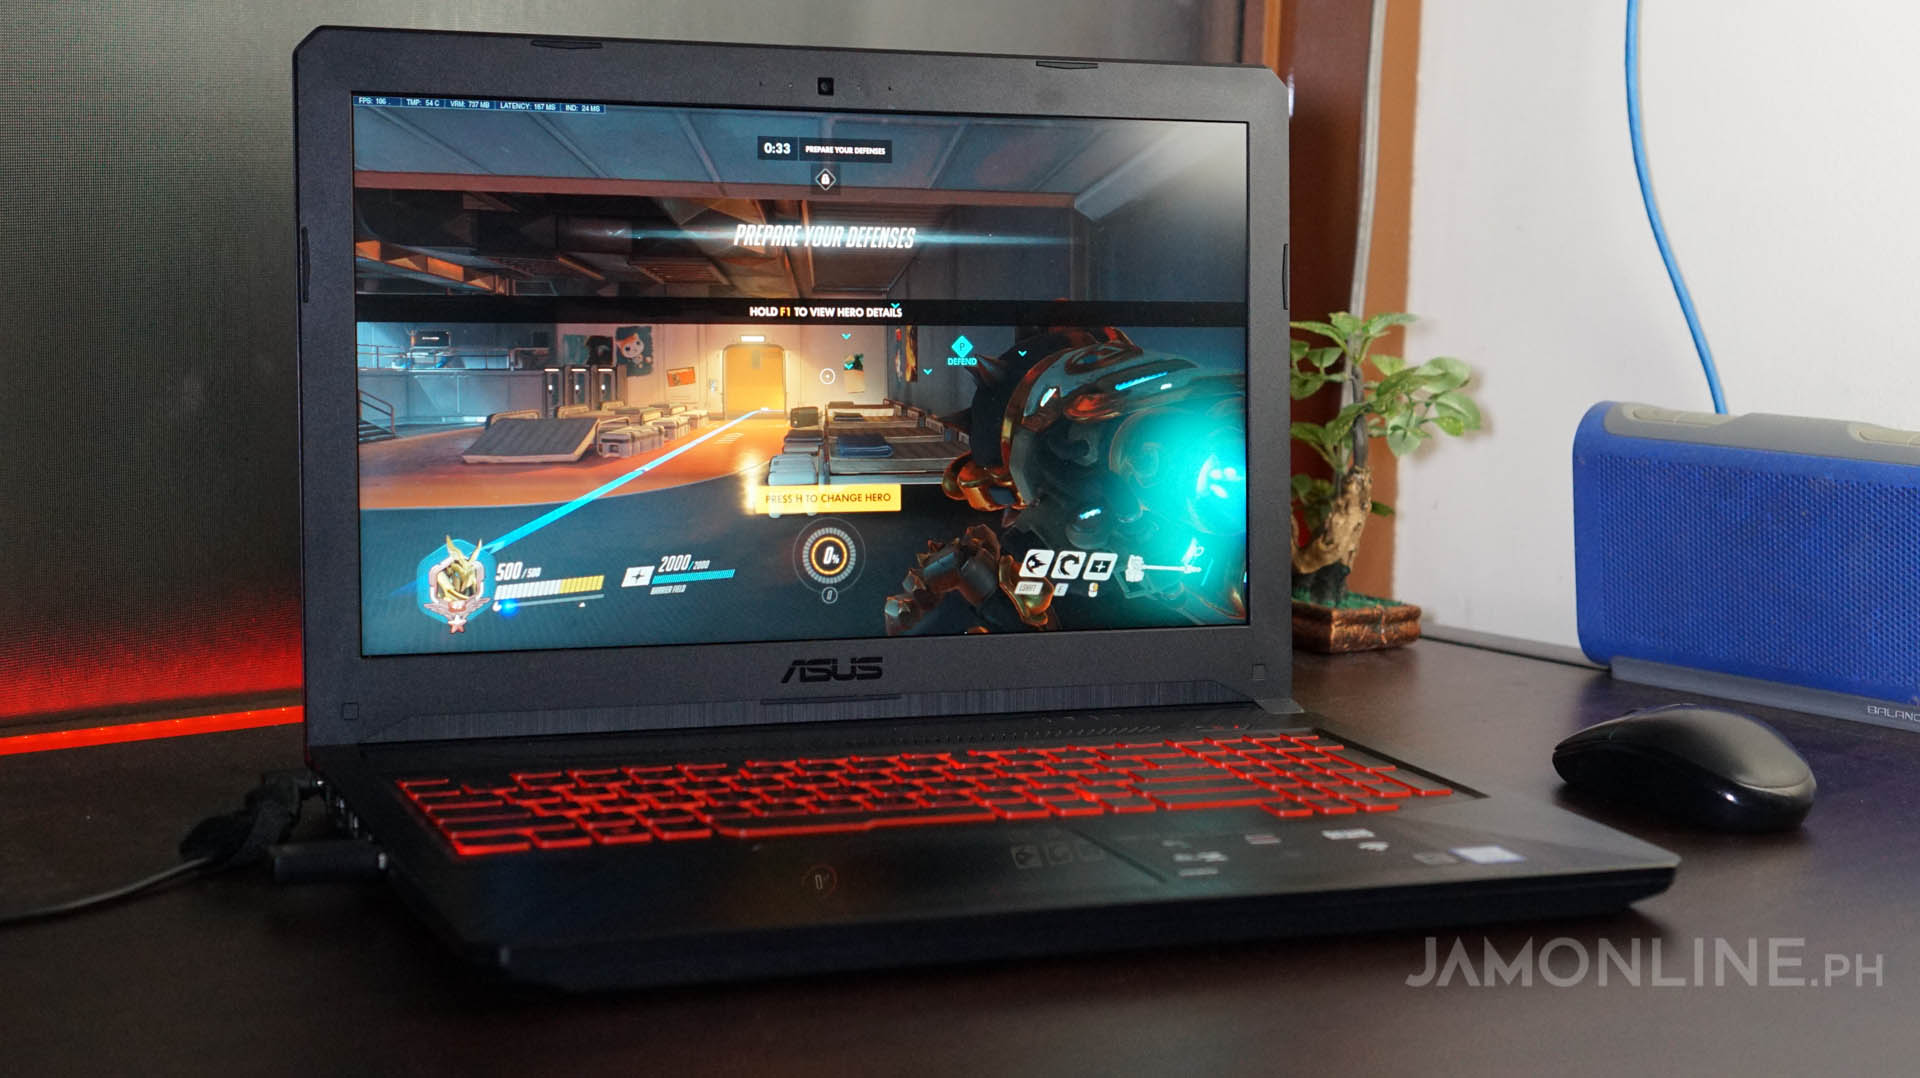 Asus Tuf Gaming Fx504 Notebook Review - Jam Online | Philippines Tech News  & Reviews